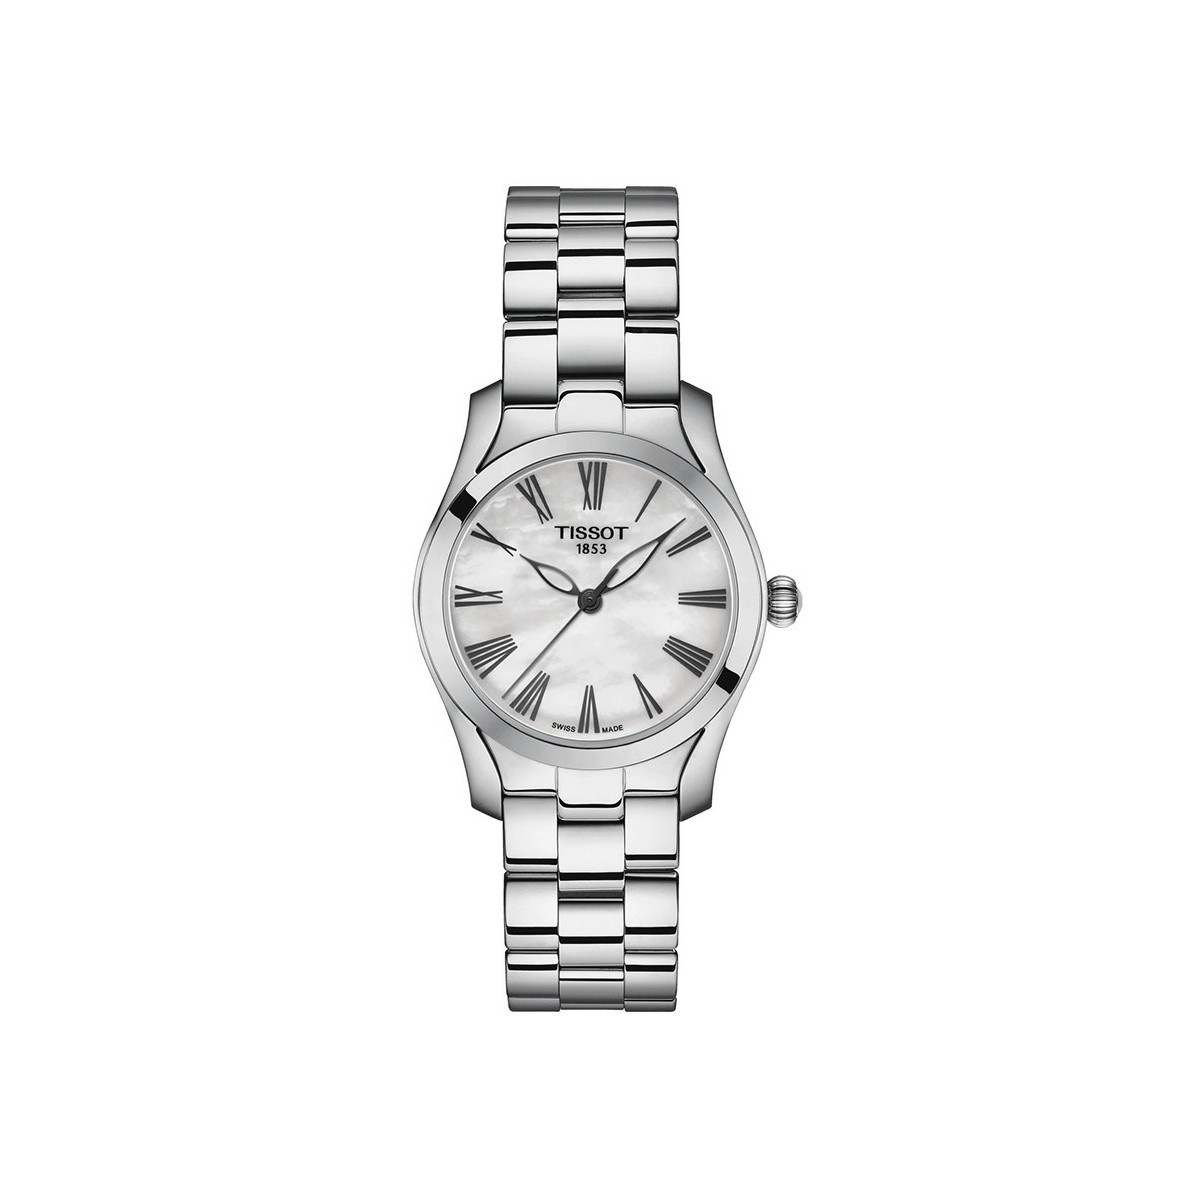 TISSOT T-WAVE MOTHER OF PEARL DIAL